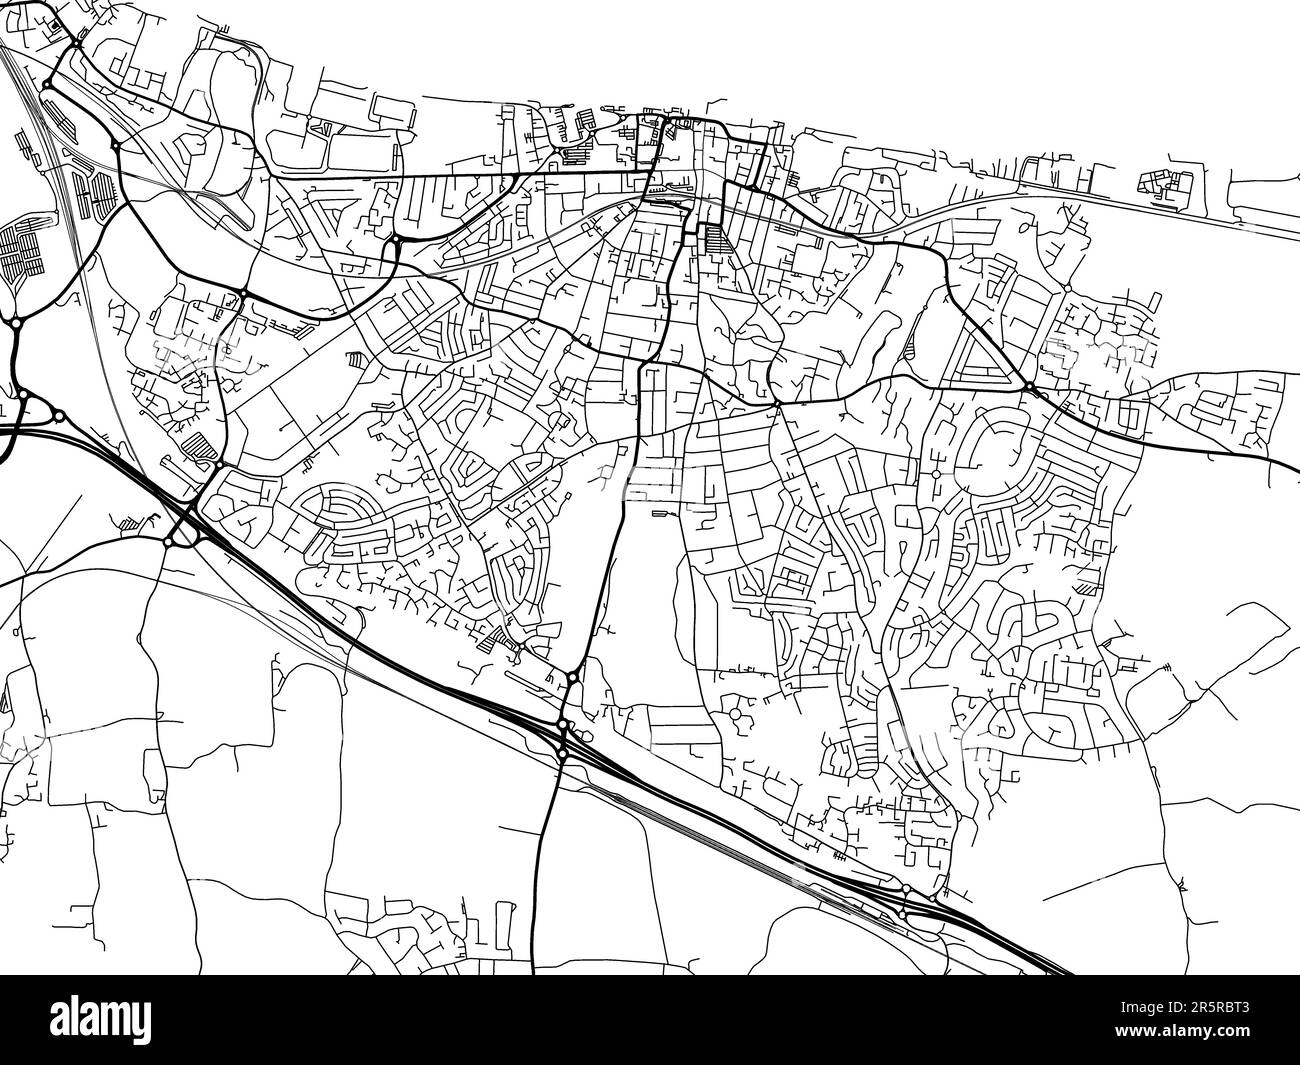 Road map of the city of  Gravesend in the United Kingdom on a white background. Stock Photo